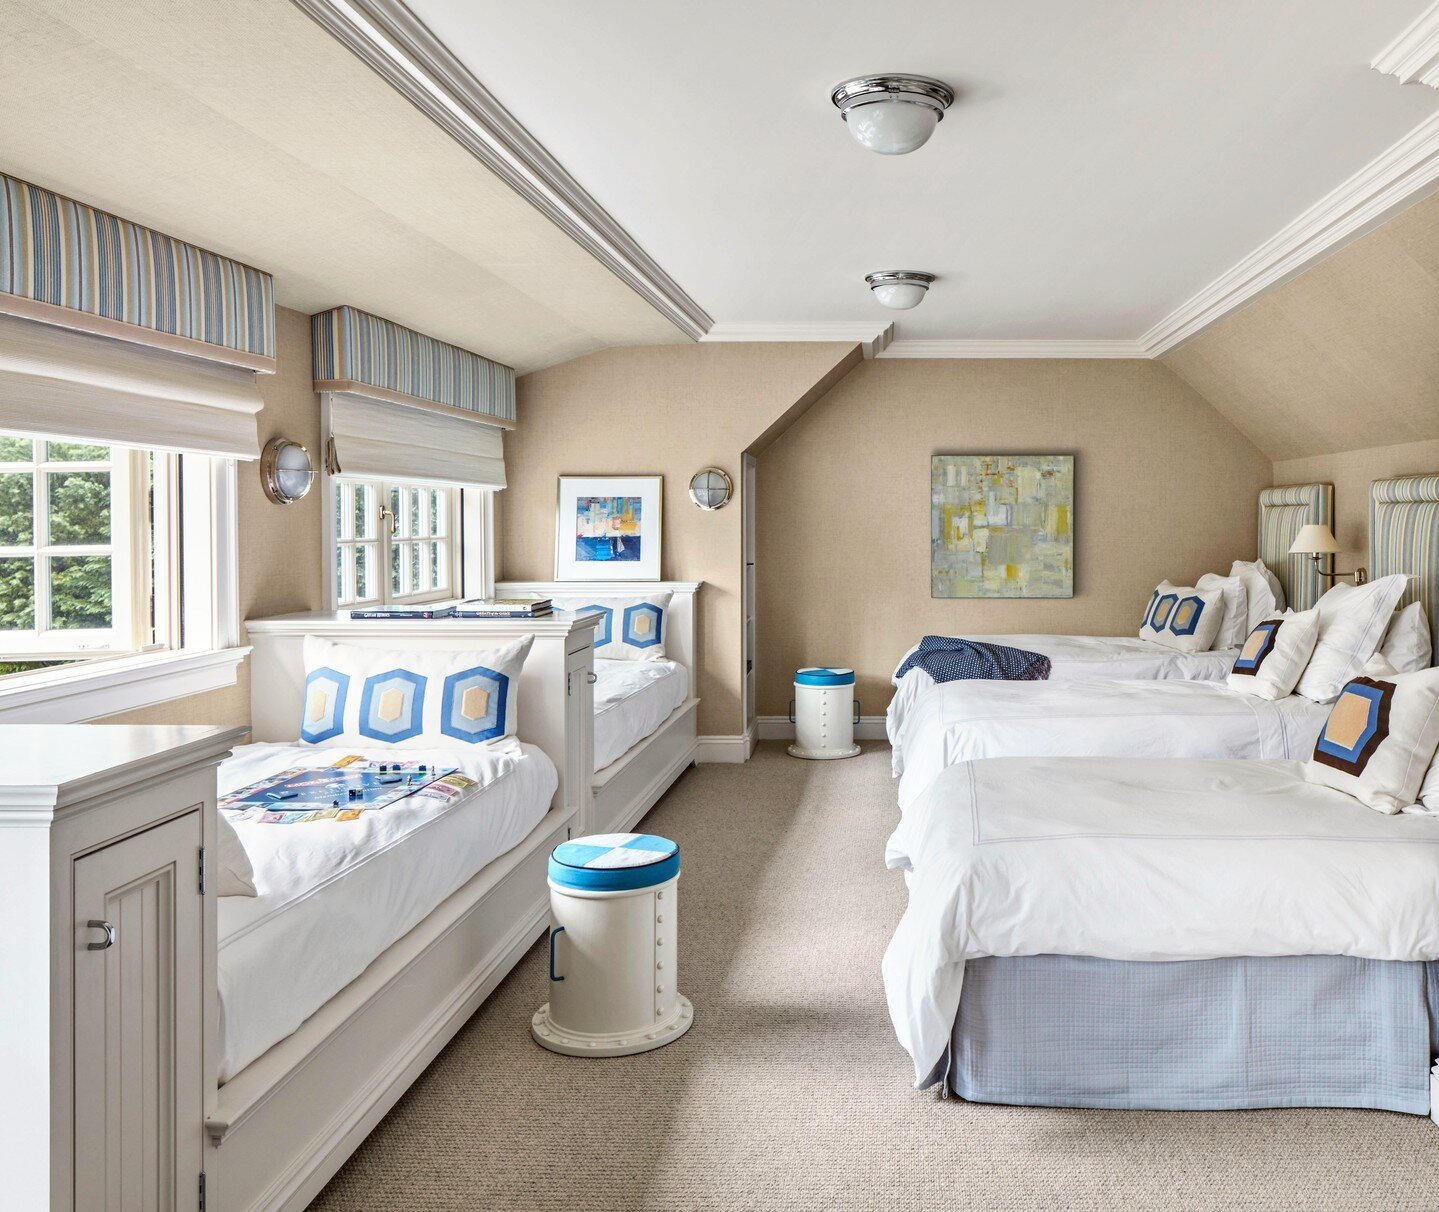 The bunk room on the third floor of this Westchester colonial is the perfect children's oasis and play area for family gatherings!⁠
⁠
Architect: @charleshiltonarchitects⁠
Interior Designer: @aandrewsinteriordesign⁠
Builder: @significanthomesllc⁠
⁠
Ph